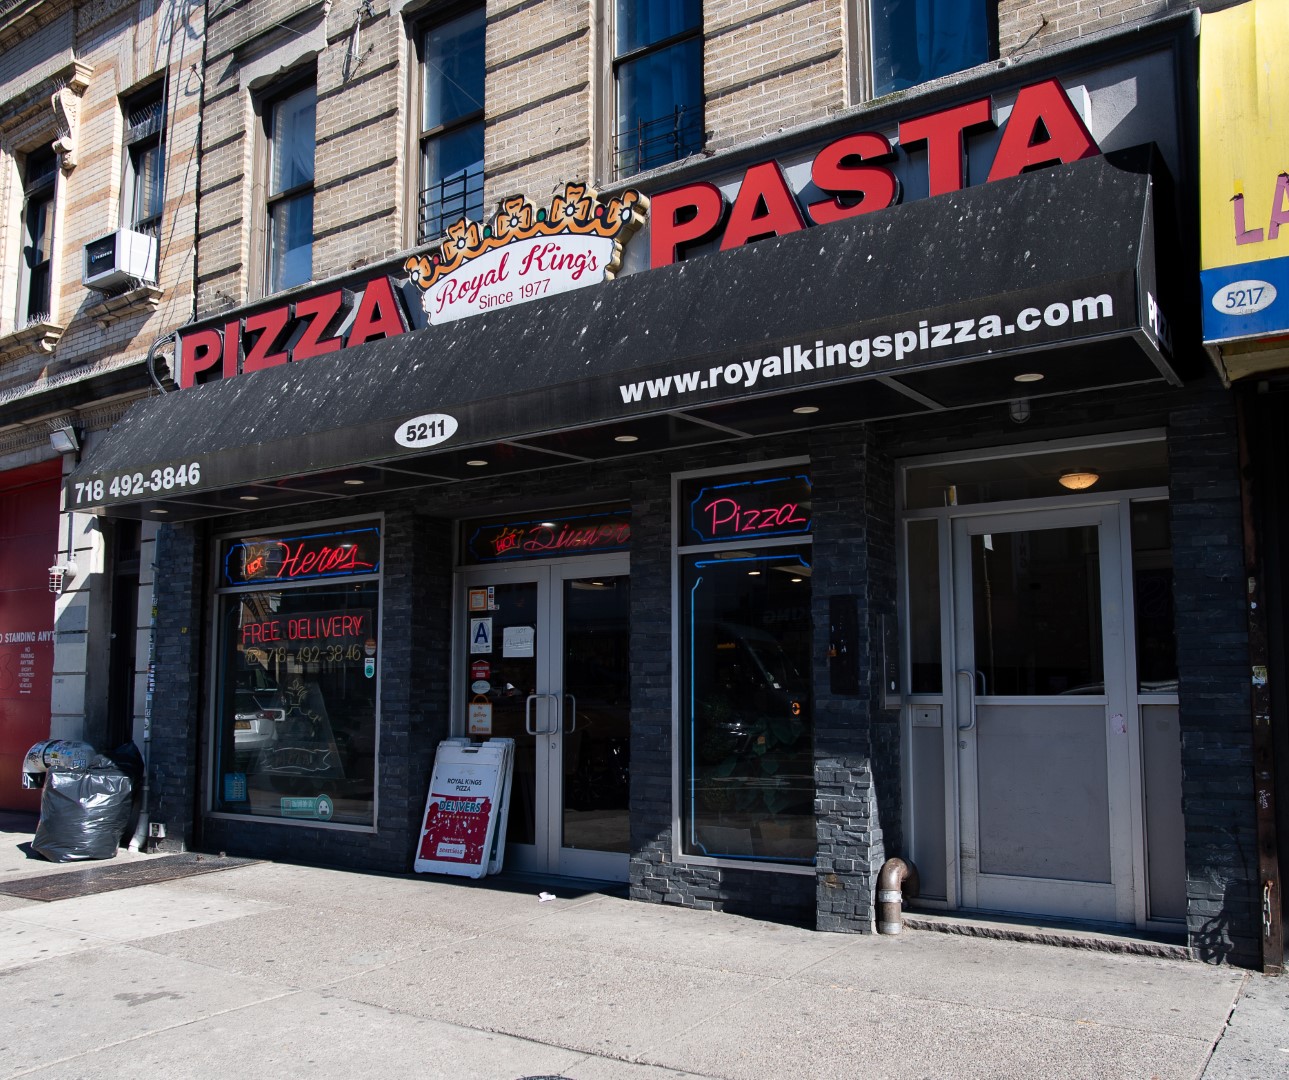 Exterior of a pizza and pasta restaurant named "royal kings pizza" featuring a black awning with red and yellow lettering, displaying advertisements for pizza and free delivery.